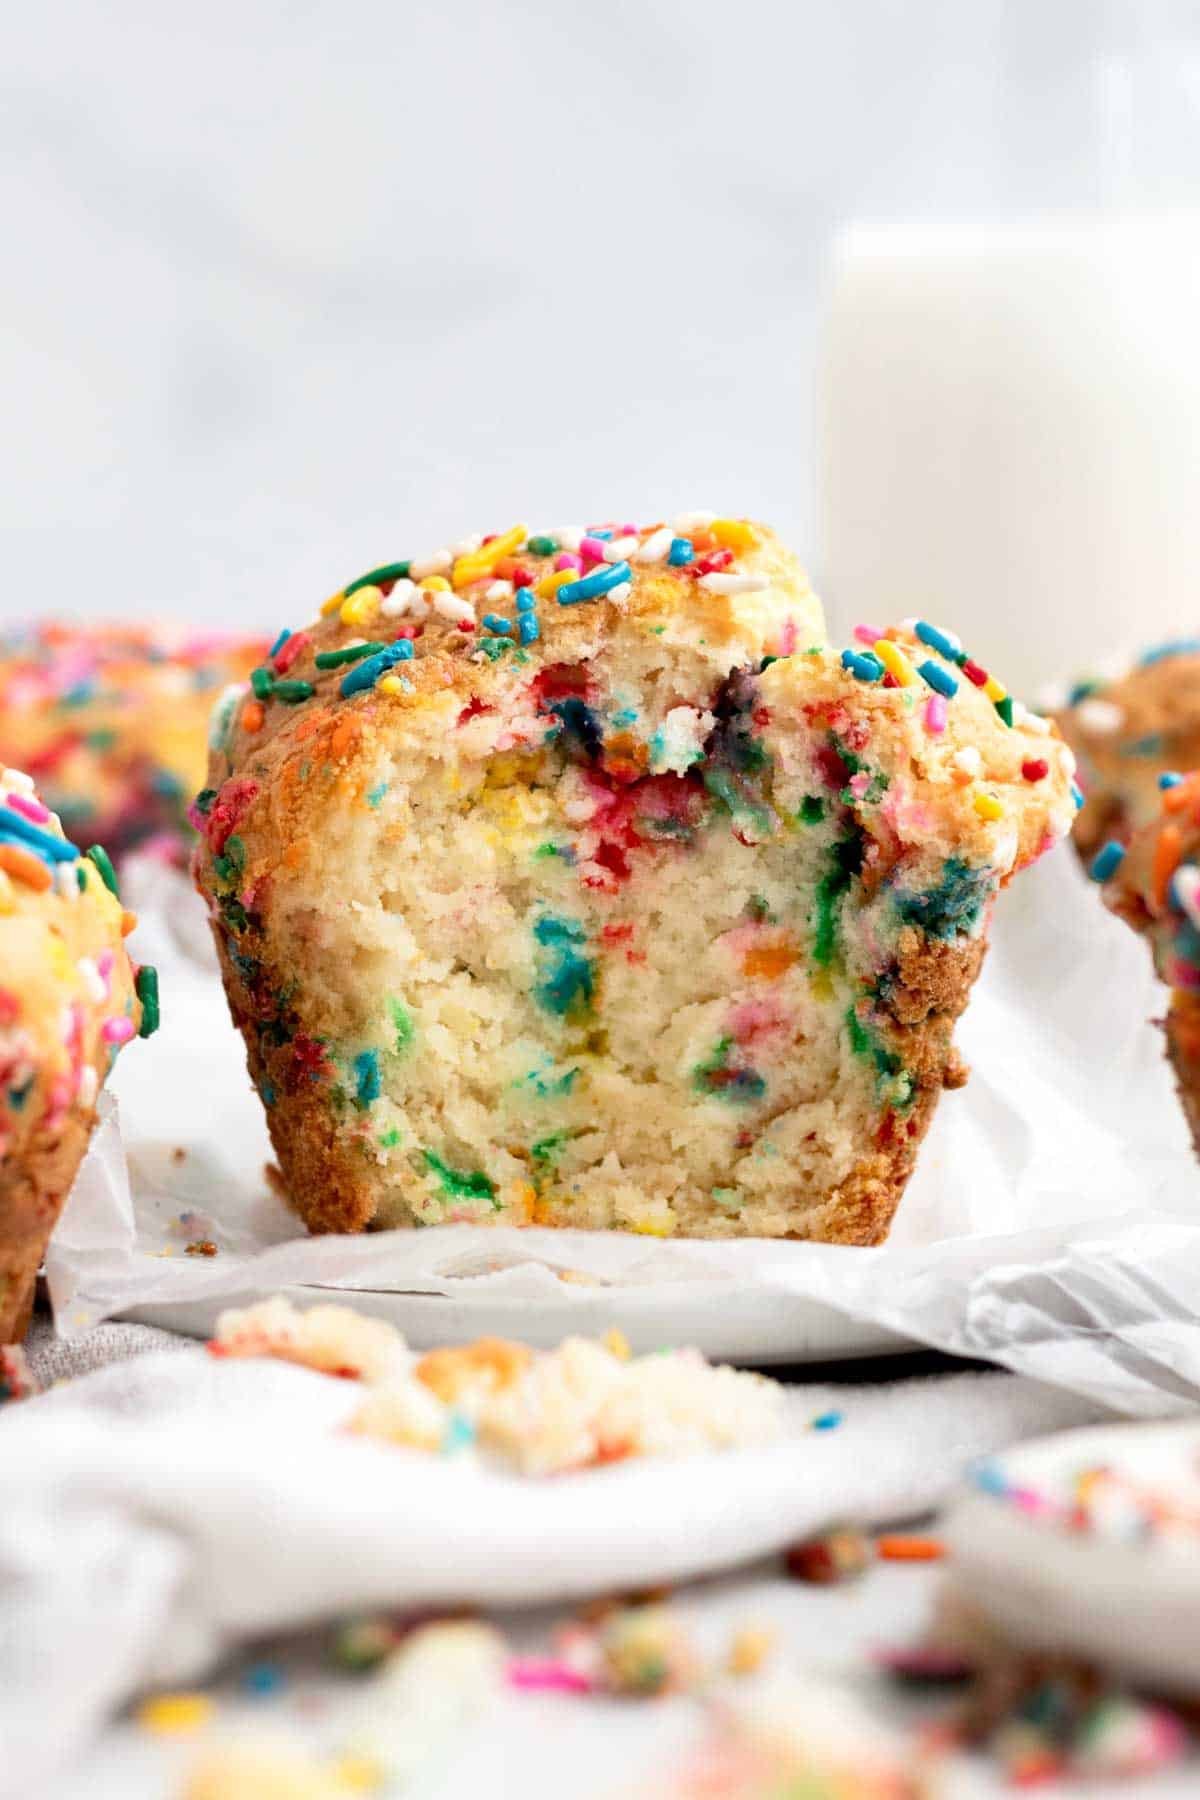 A bite reveals a light soft interior with dashes of rainbow infusions in this Birthday Muffin.